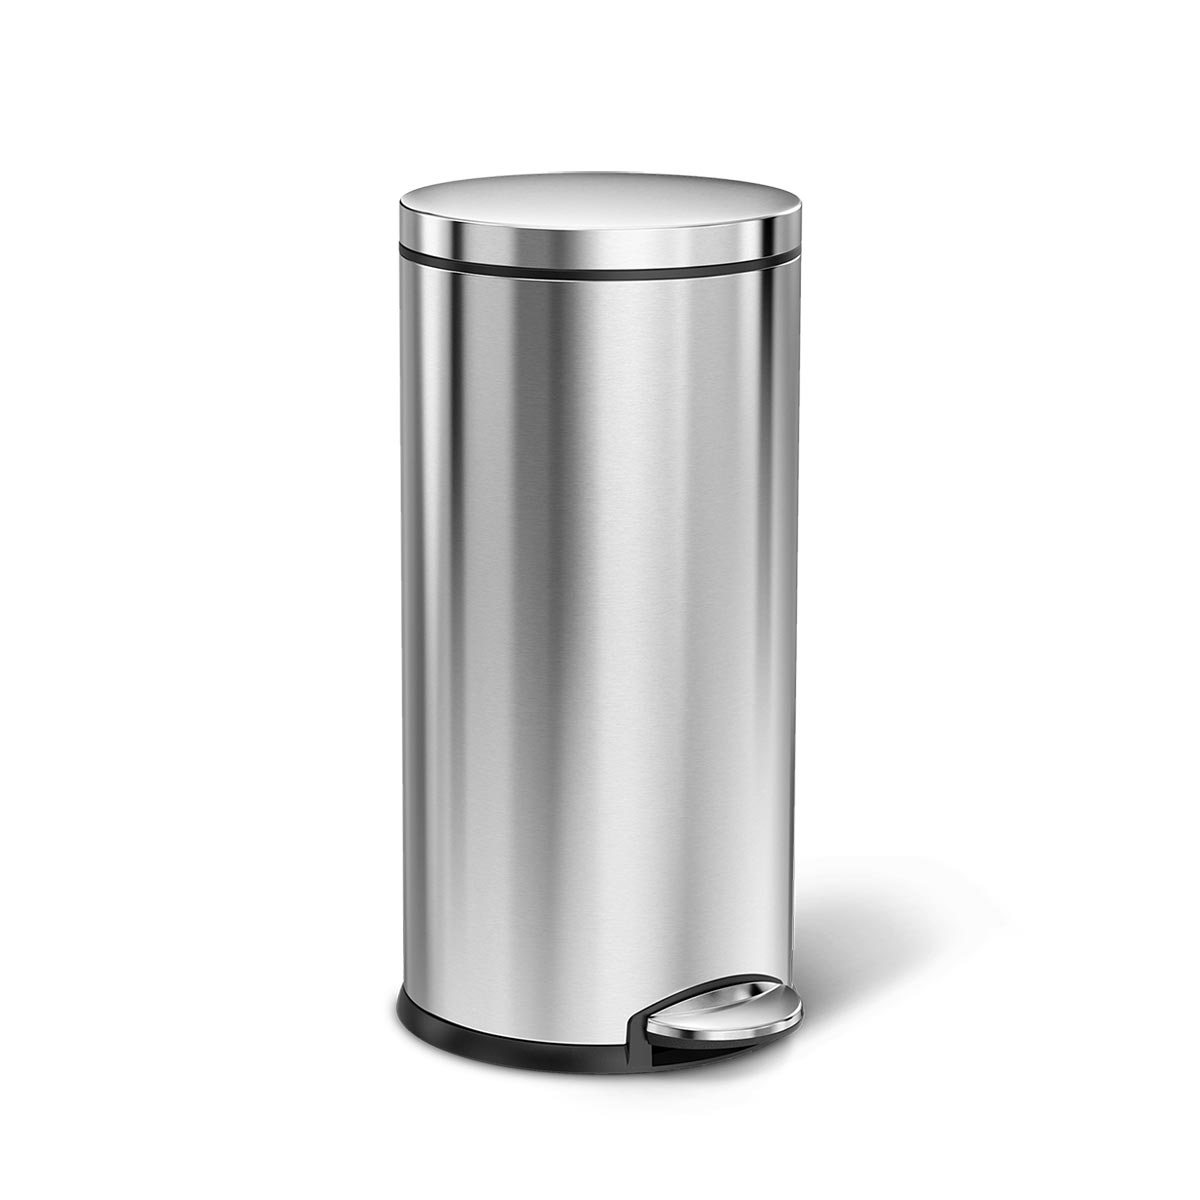 simplehuman 35 litre, round step can, fingerprint-proof stainless steel